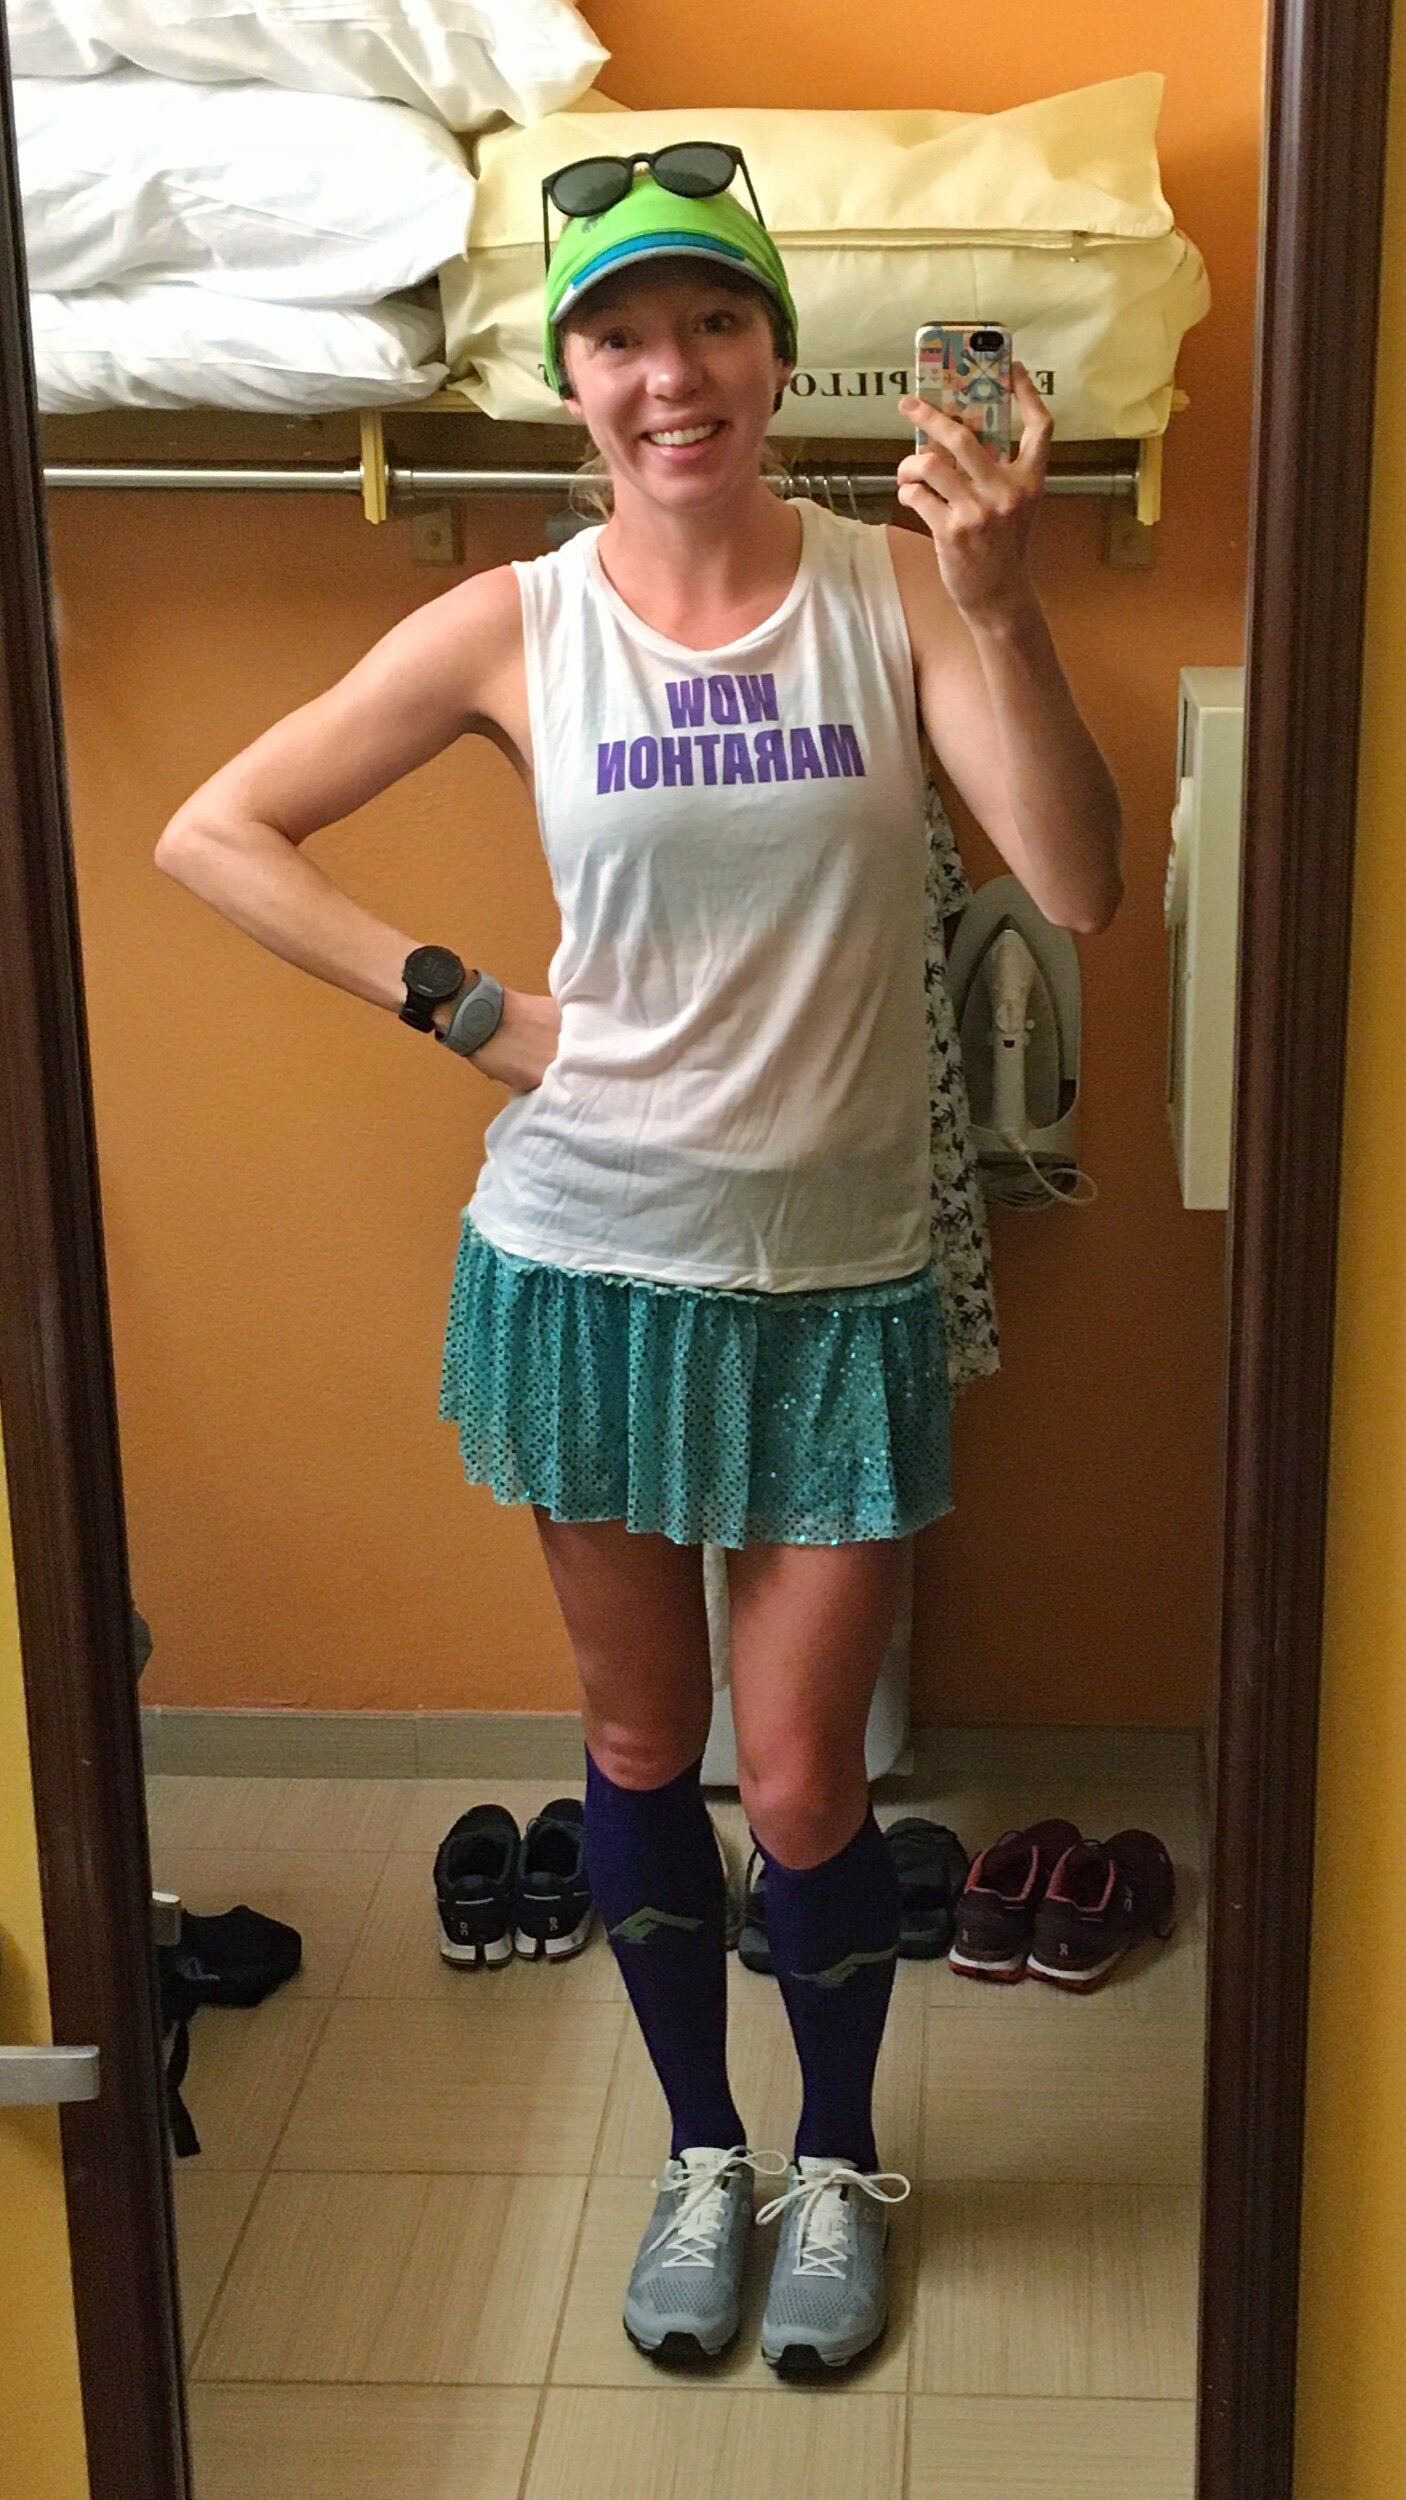 THis RawThreads top was so light-weight and perfect for this hot, hot Marathon!